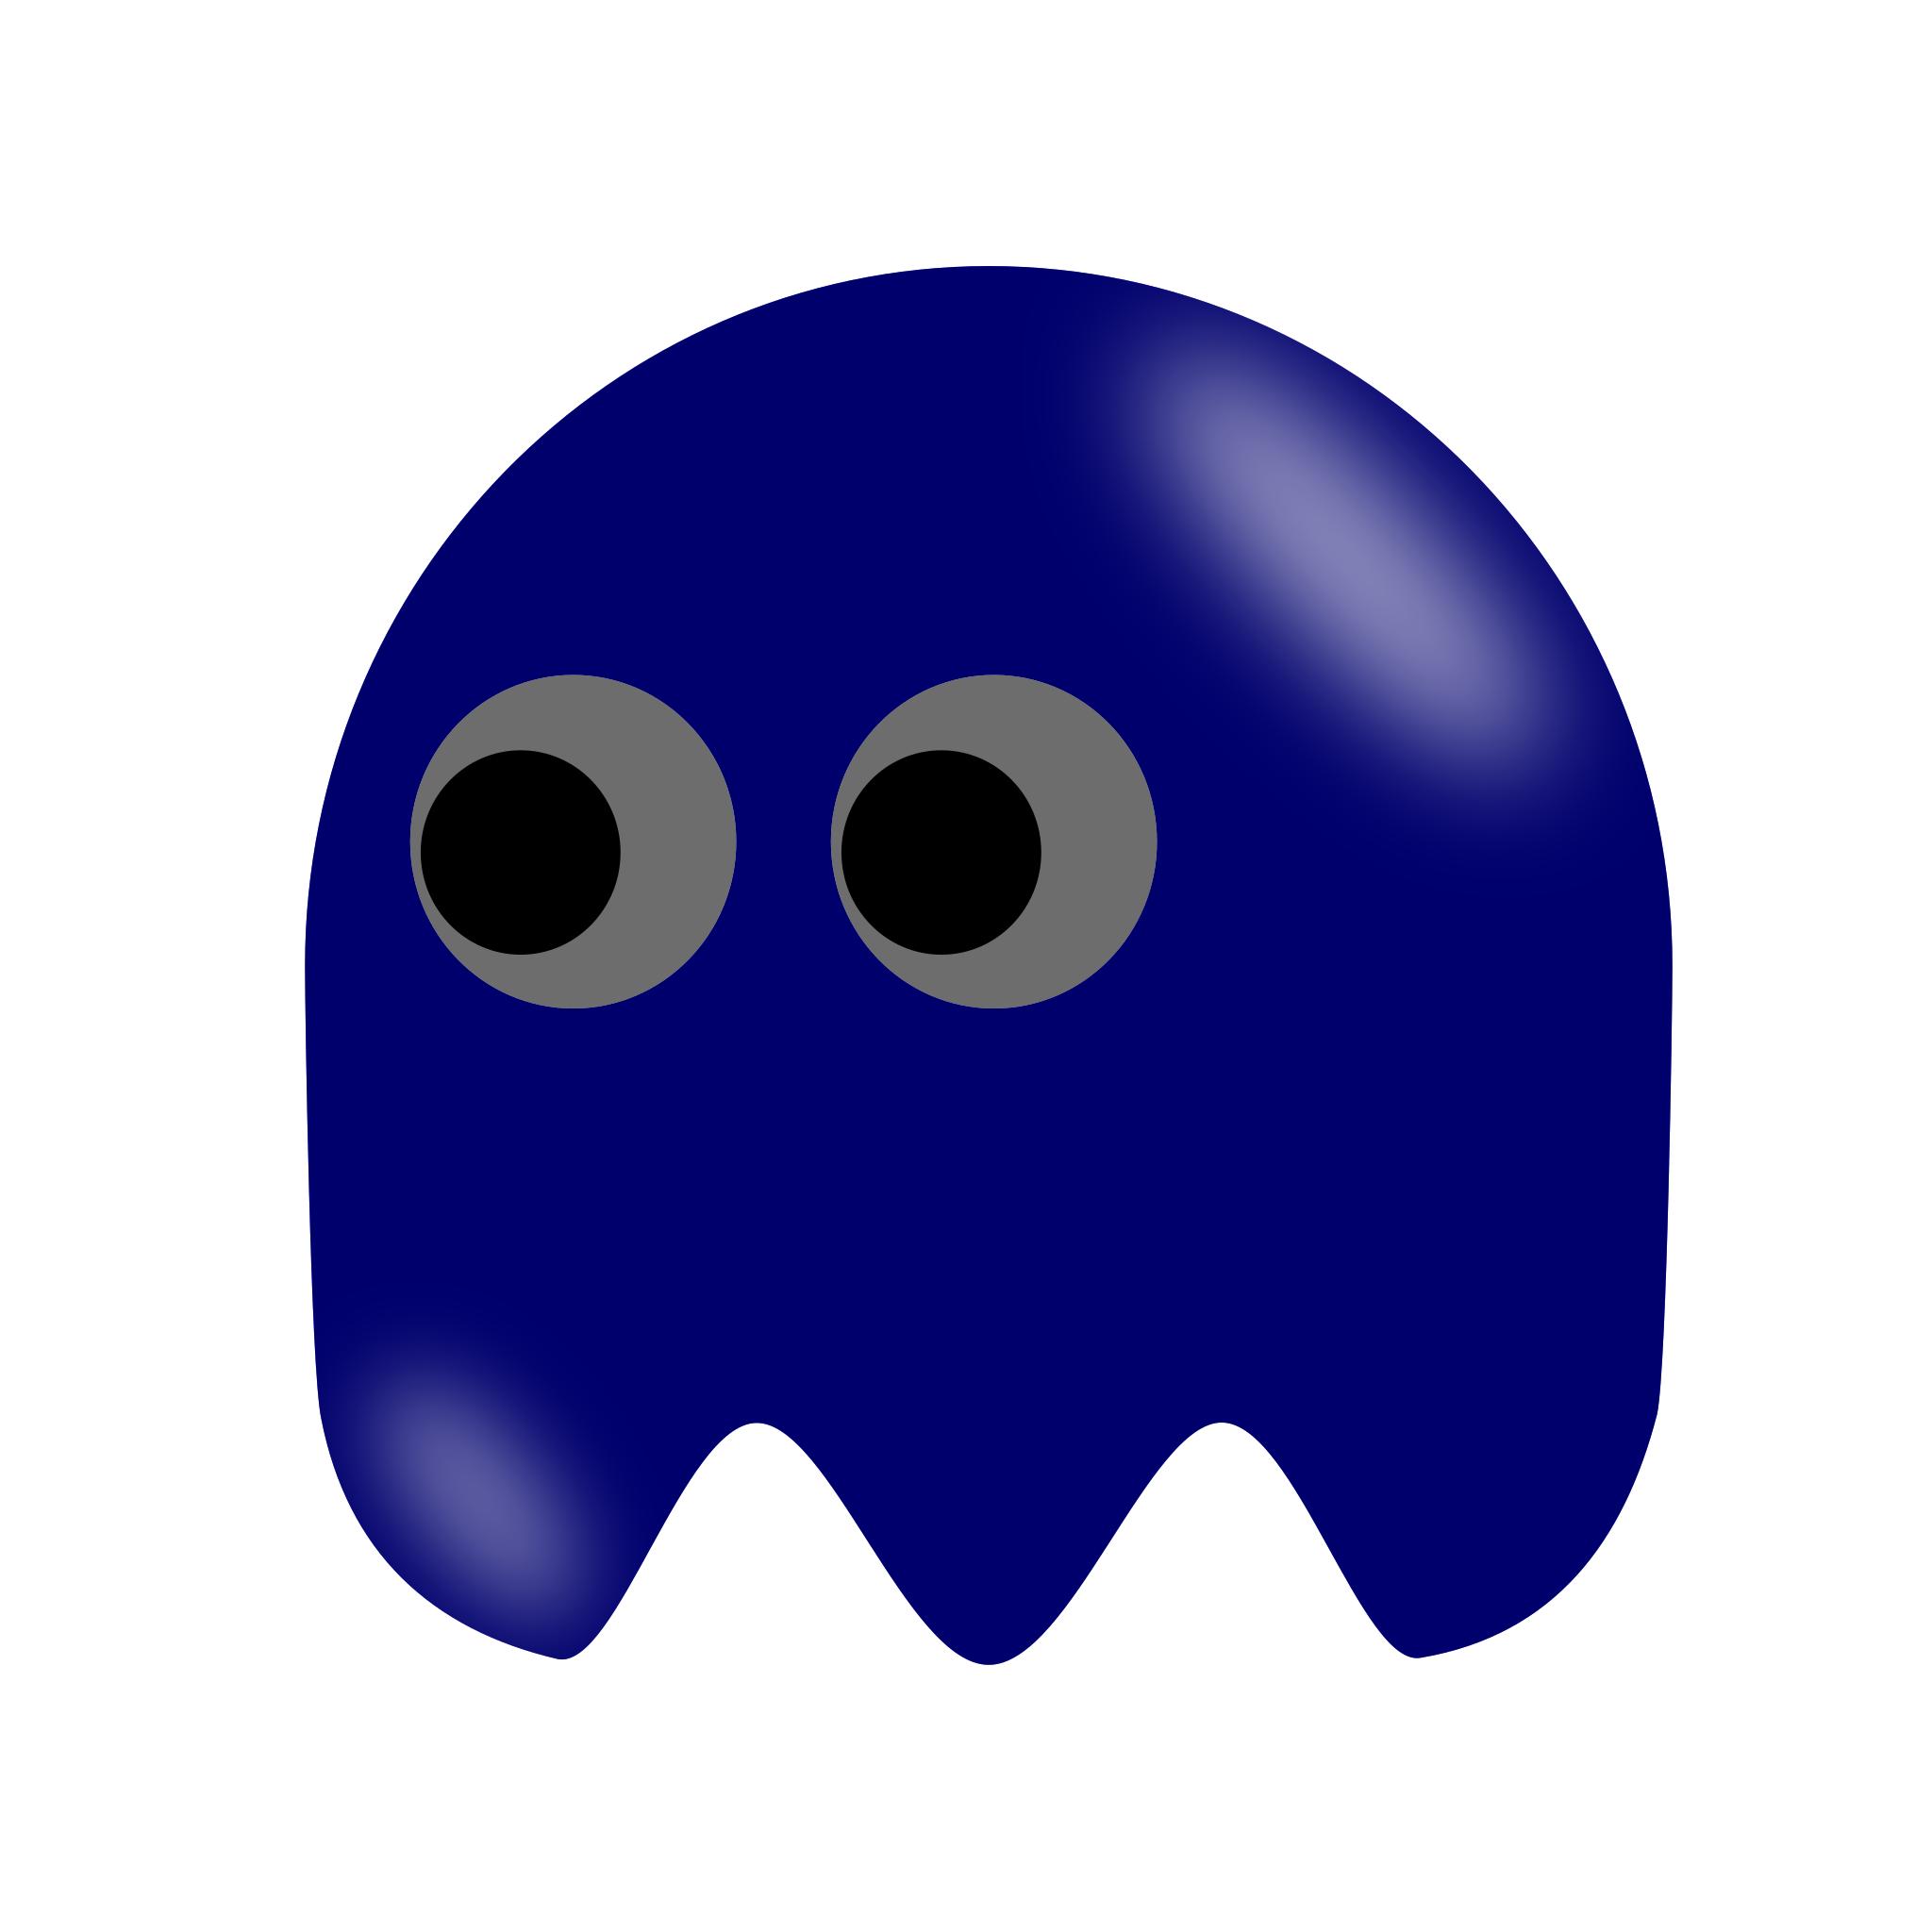 Free Images - pac man ghost cartoon.